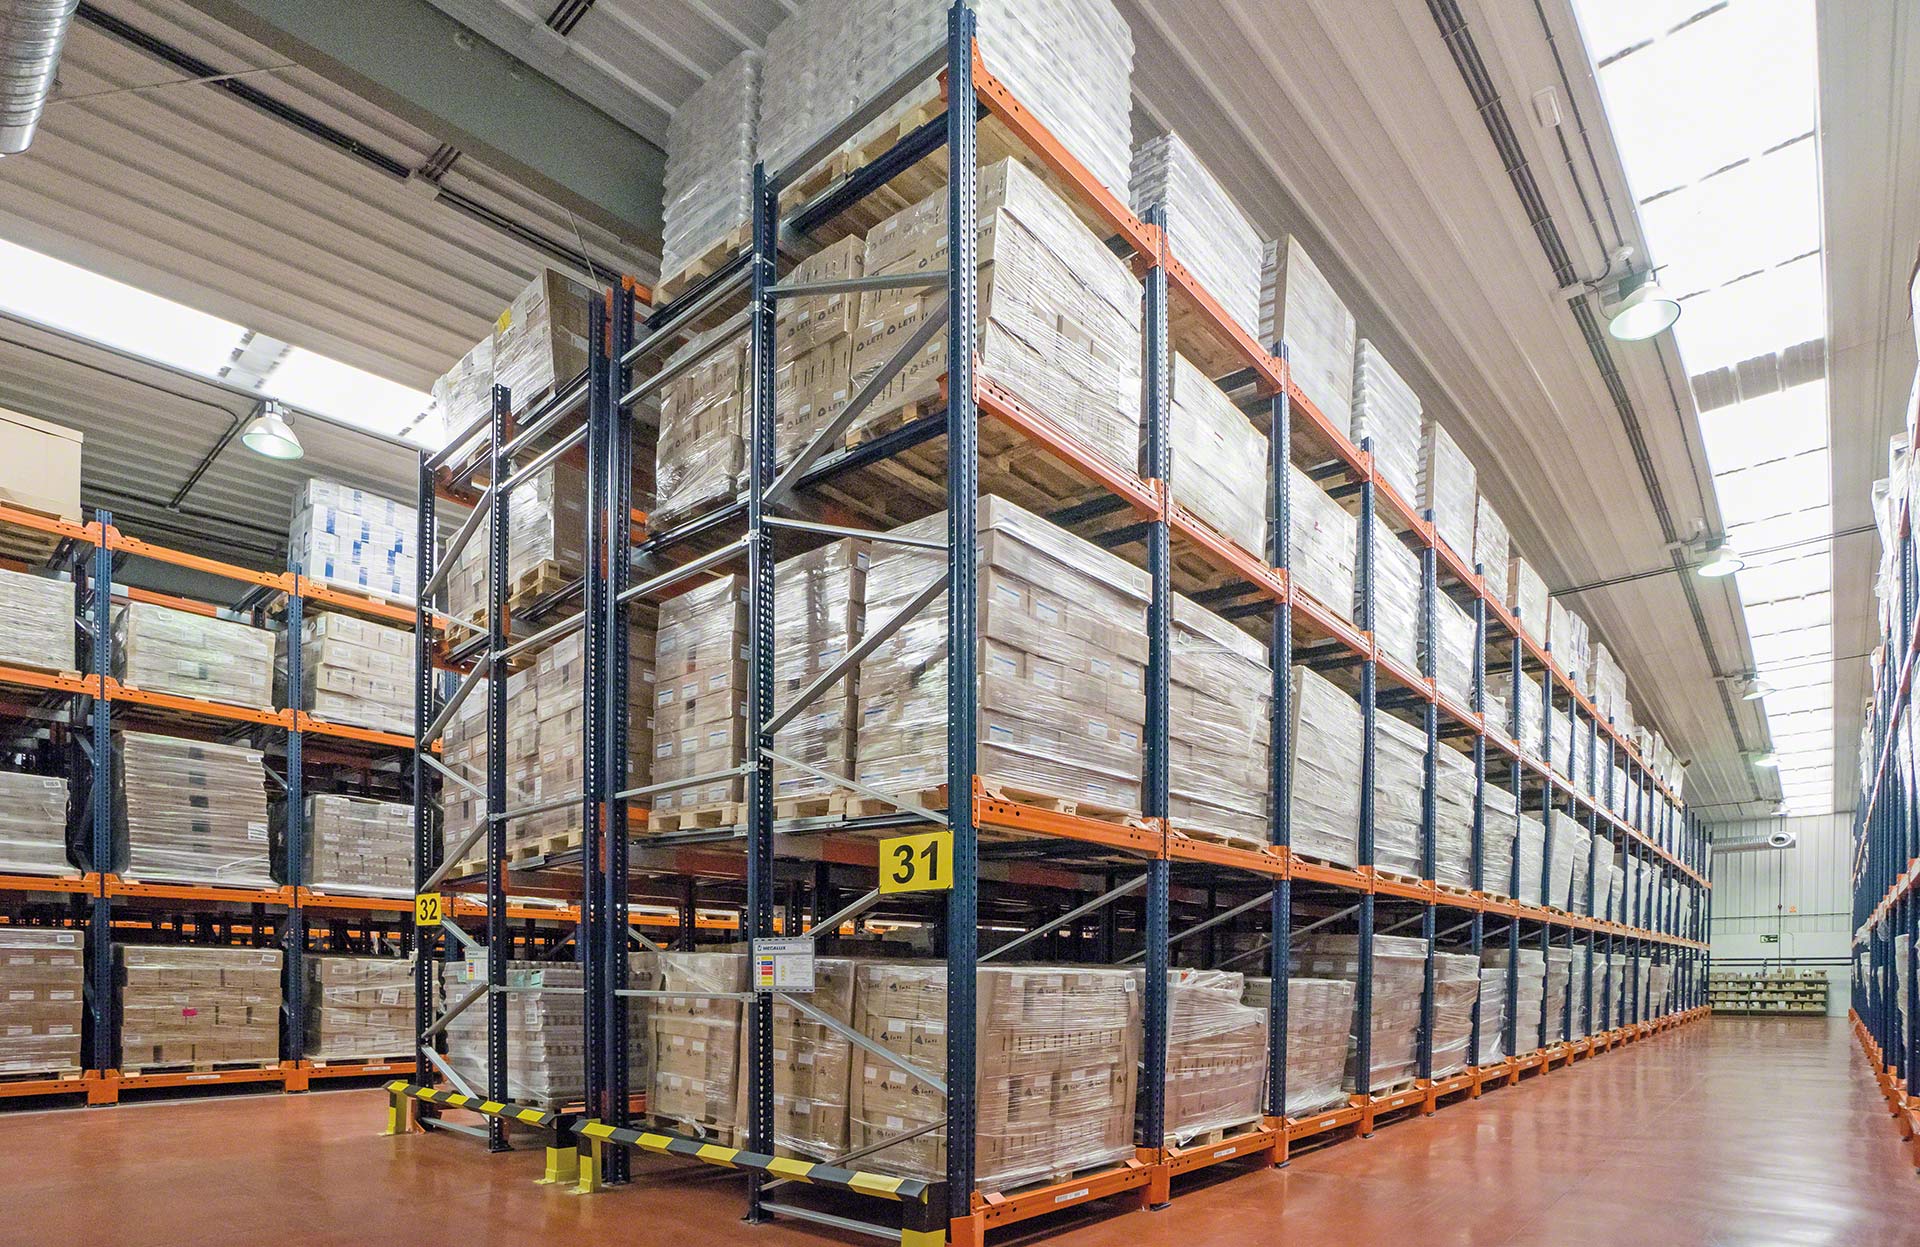 Push-back pallet racking enables pallet storage by accumulation